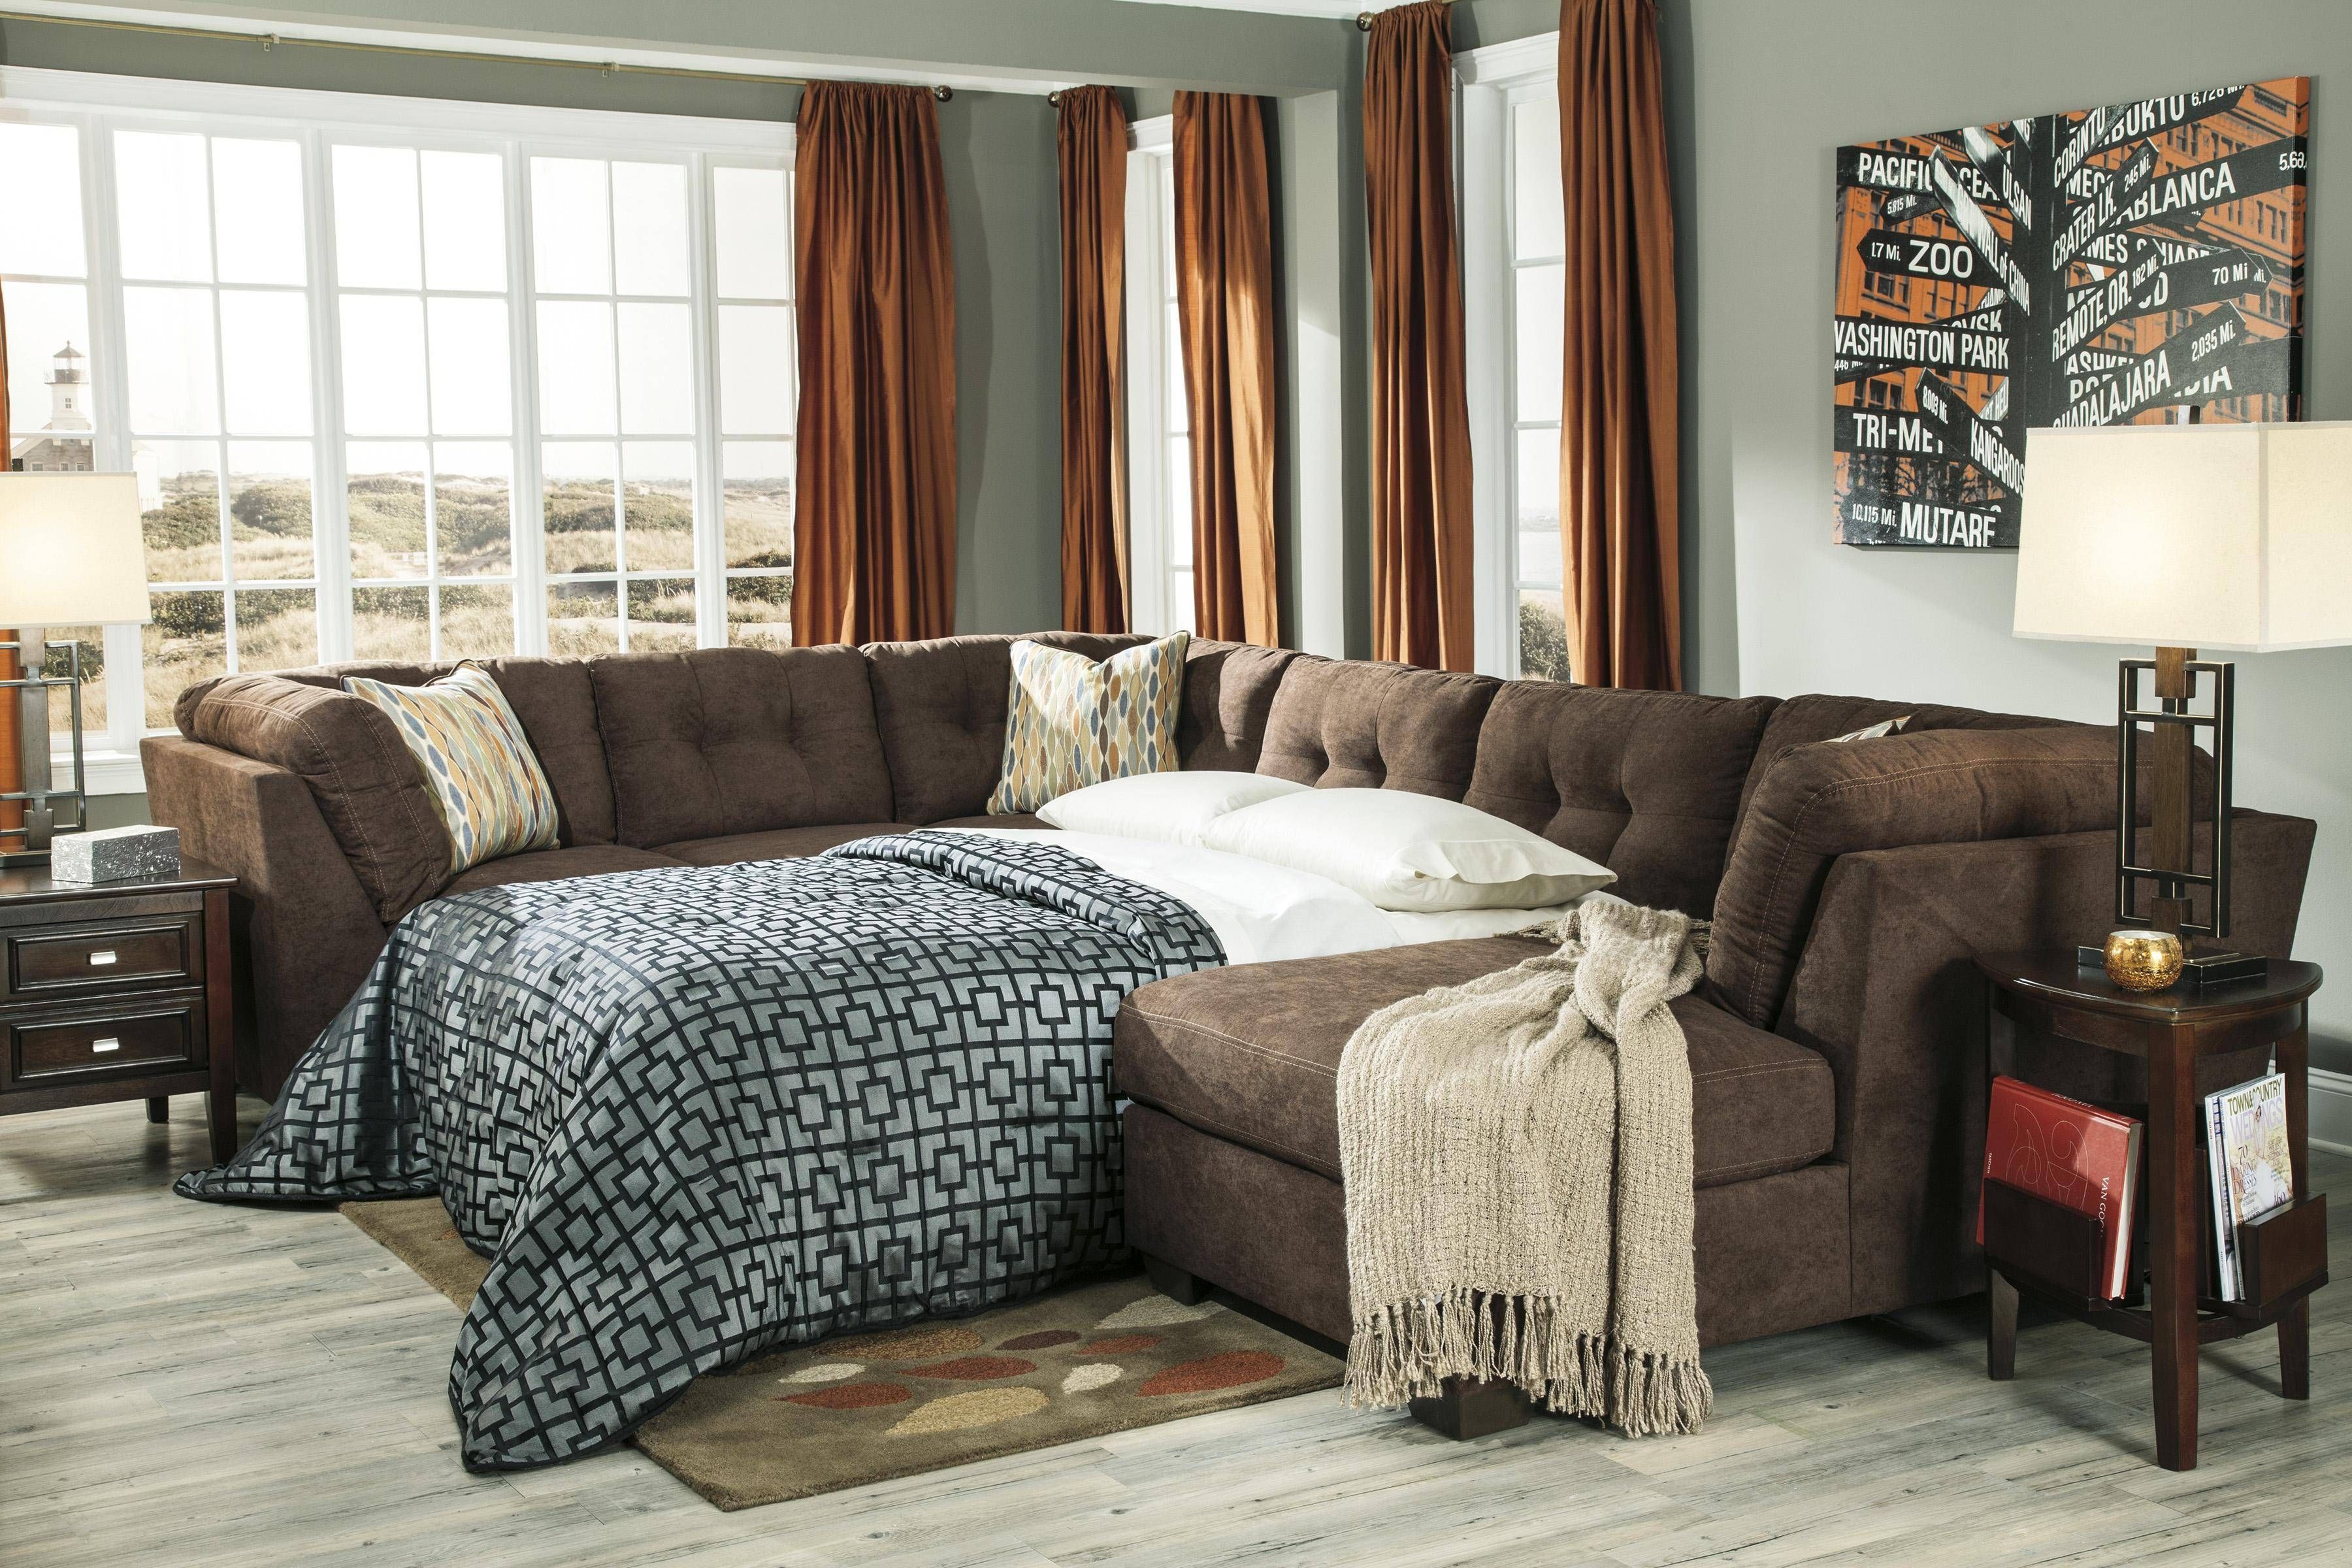 Furniture: Wondrous Alluring Sectional With Sleeper For Home Within 3 Piece Sectional Sleeper Sofa (View 13 of 30)